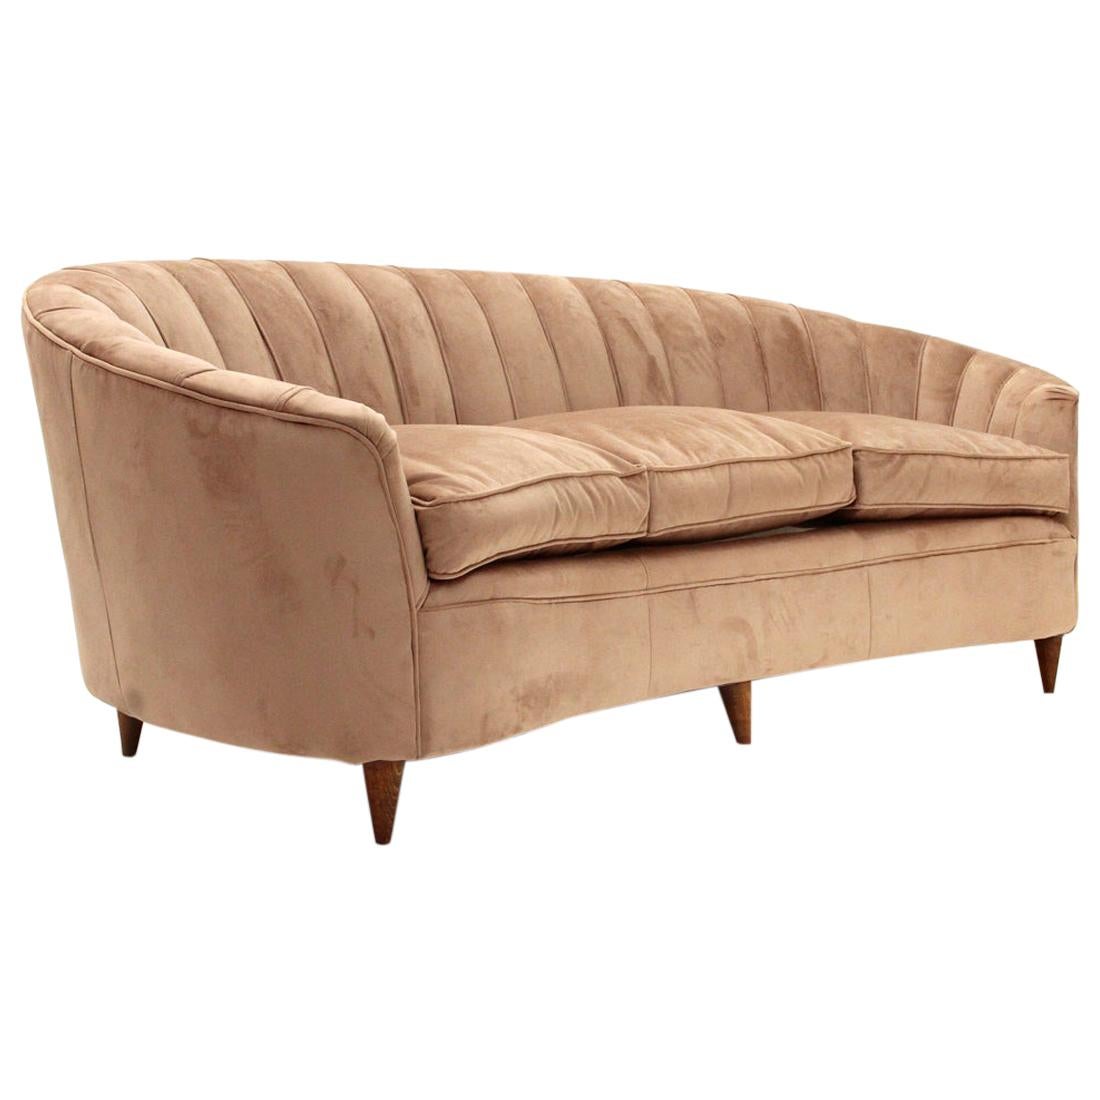 Mid-Century Modern 3-Seat Powder Pink-Colored Curved Sofa, 1950s For Sale